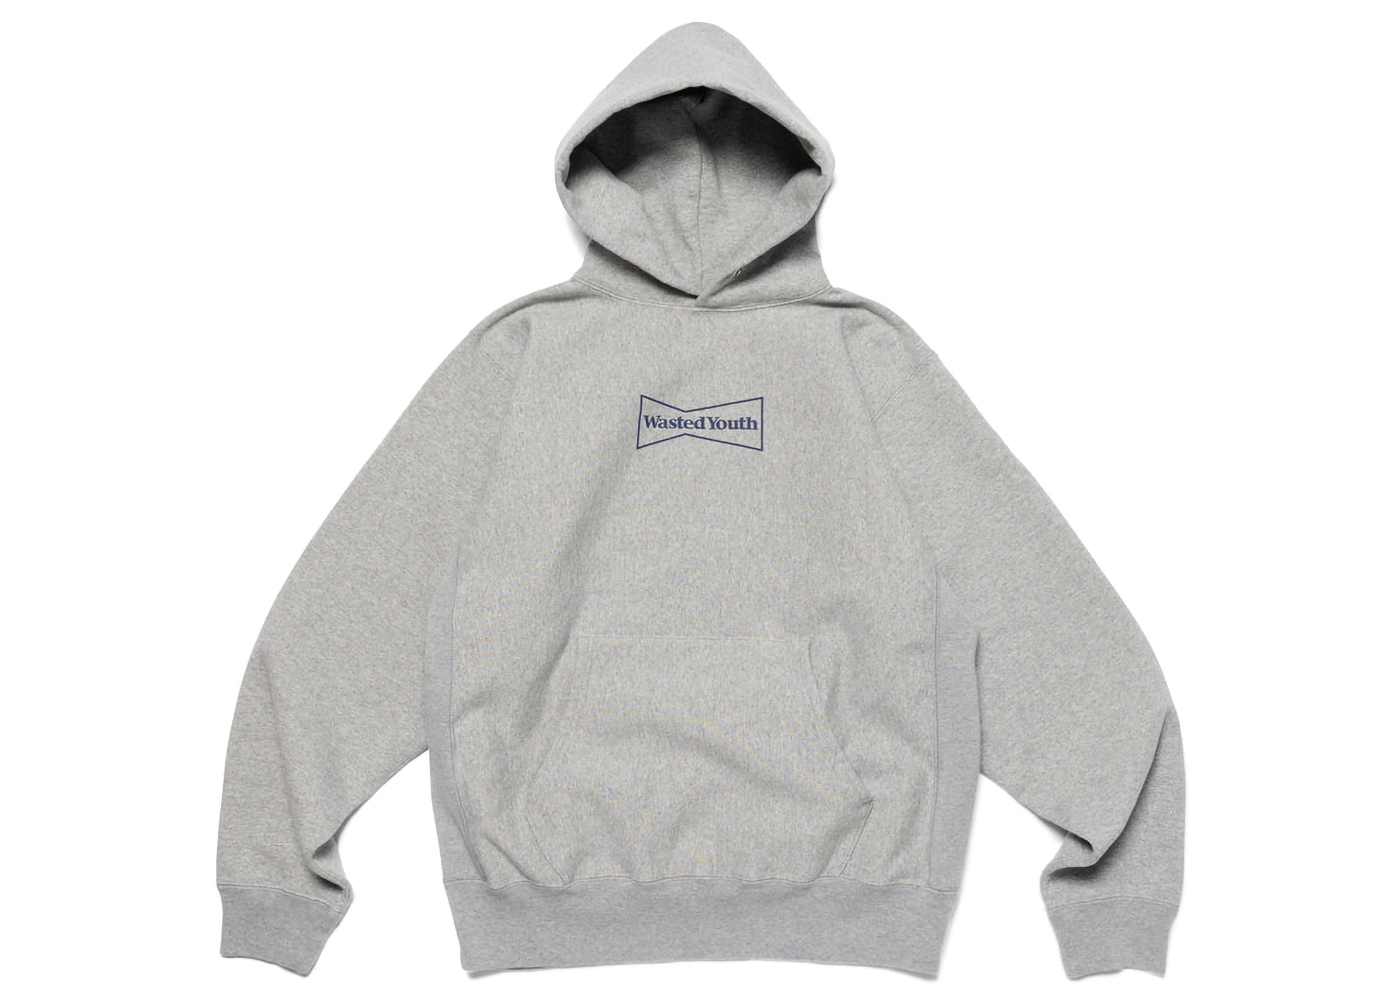 wasted youth hoodie XL - パーカー